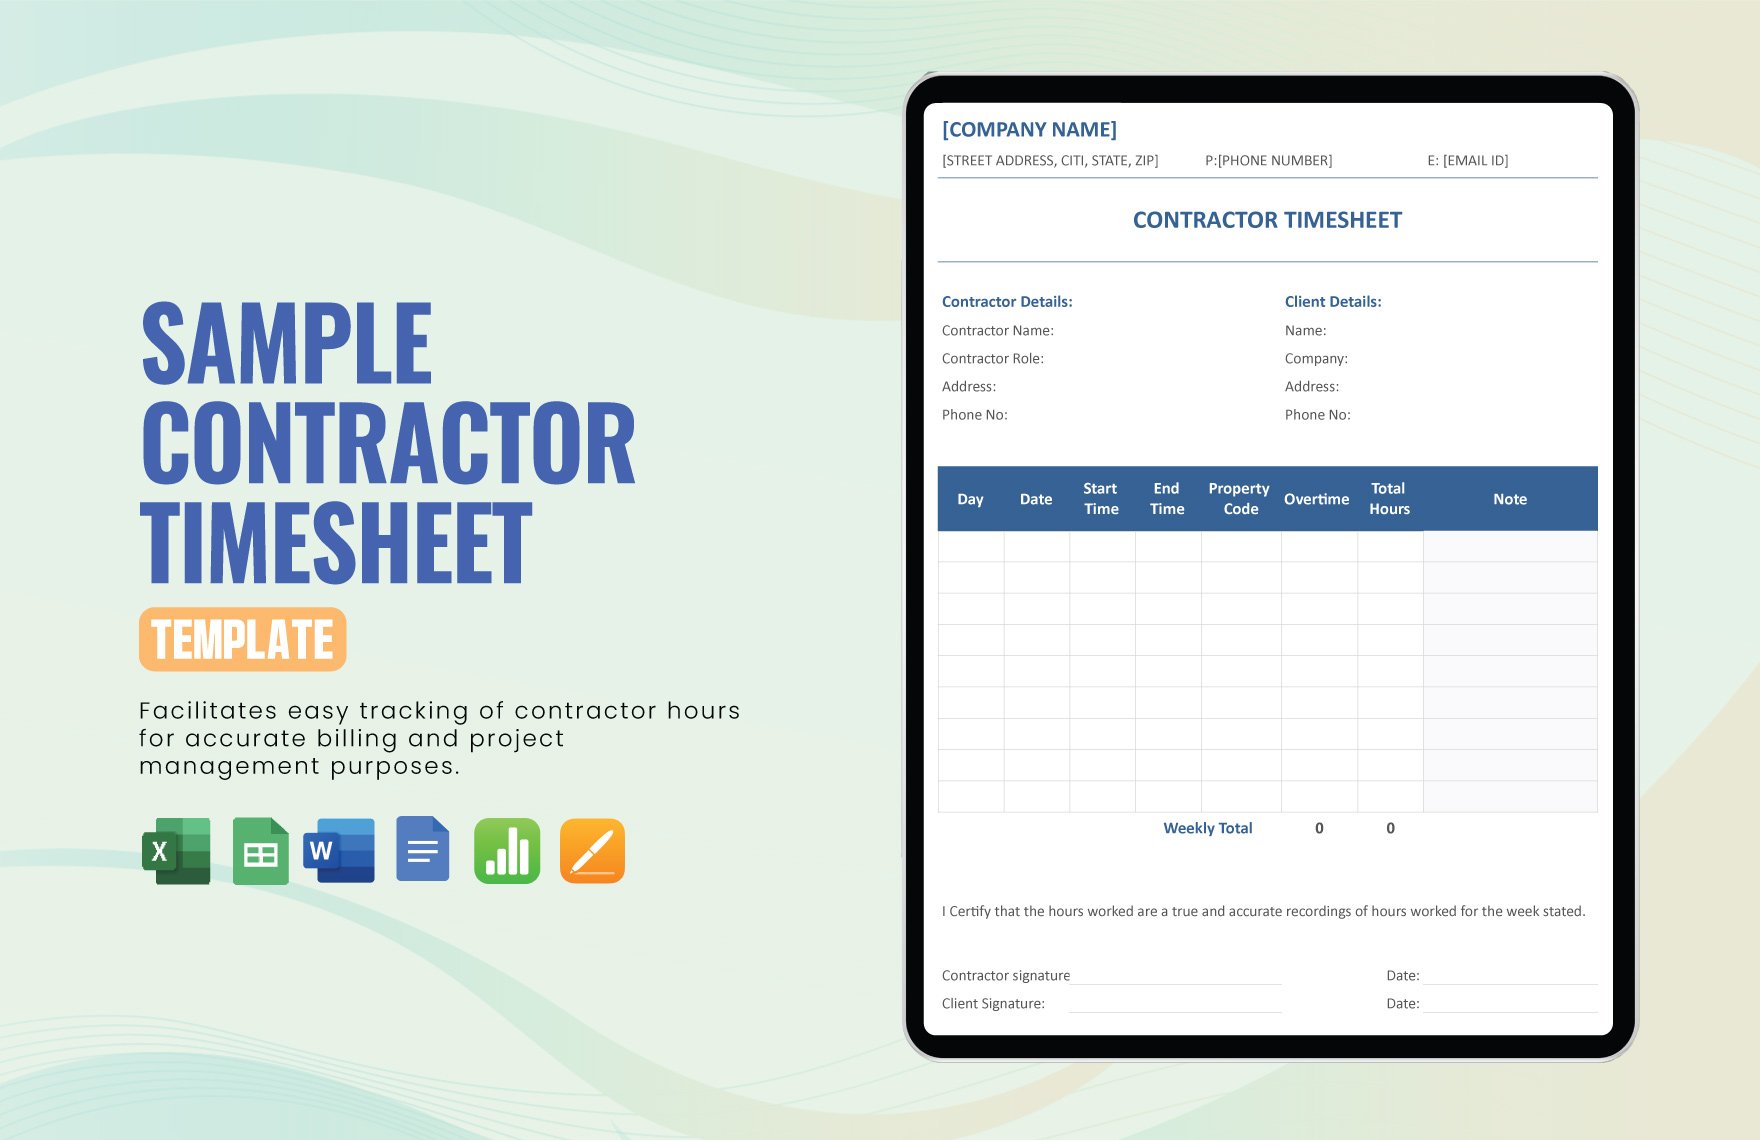 Sample Contractor Timesheet Template in Word, Google Docs, Excel, Google Sheets, Apple Pages, Apple Numbers